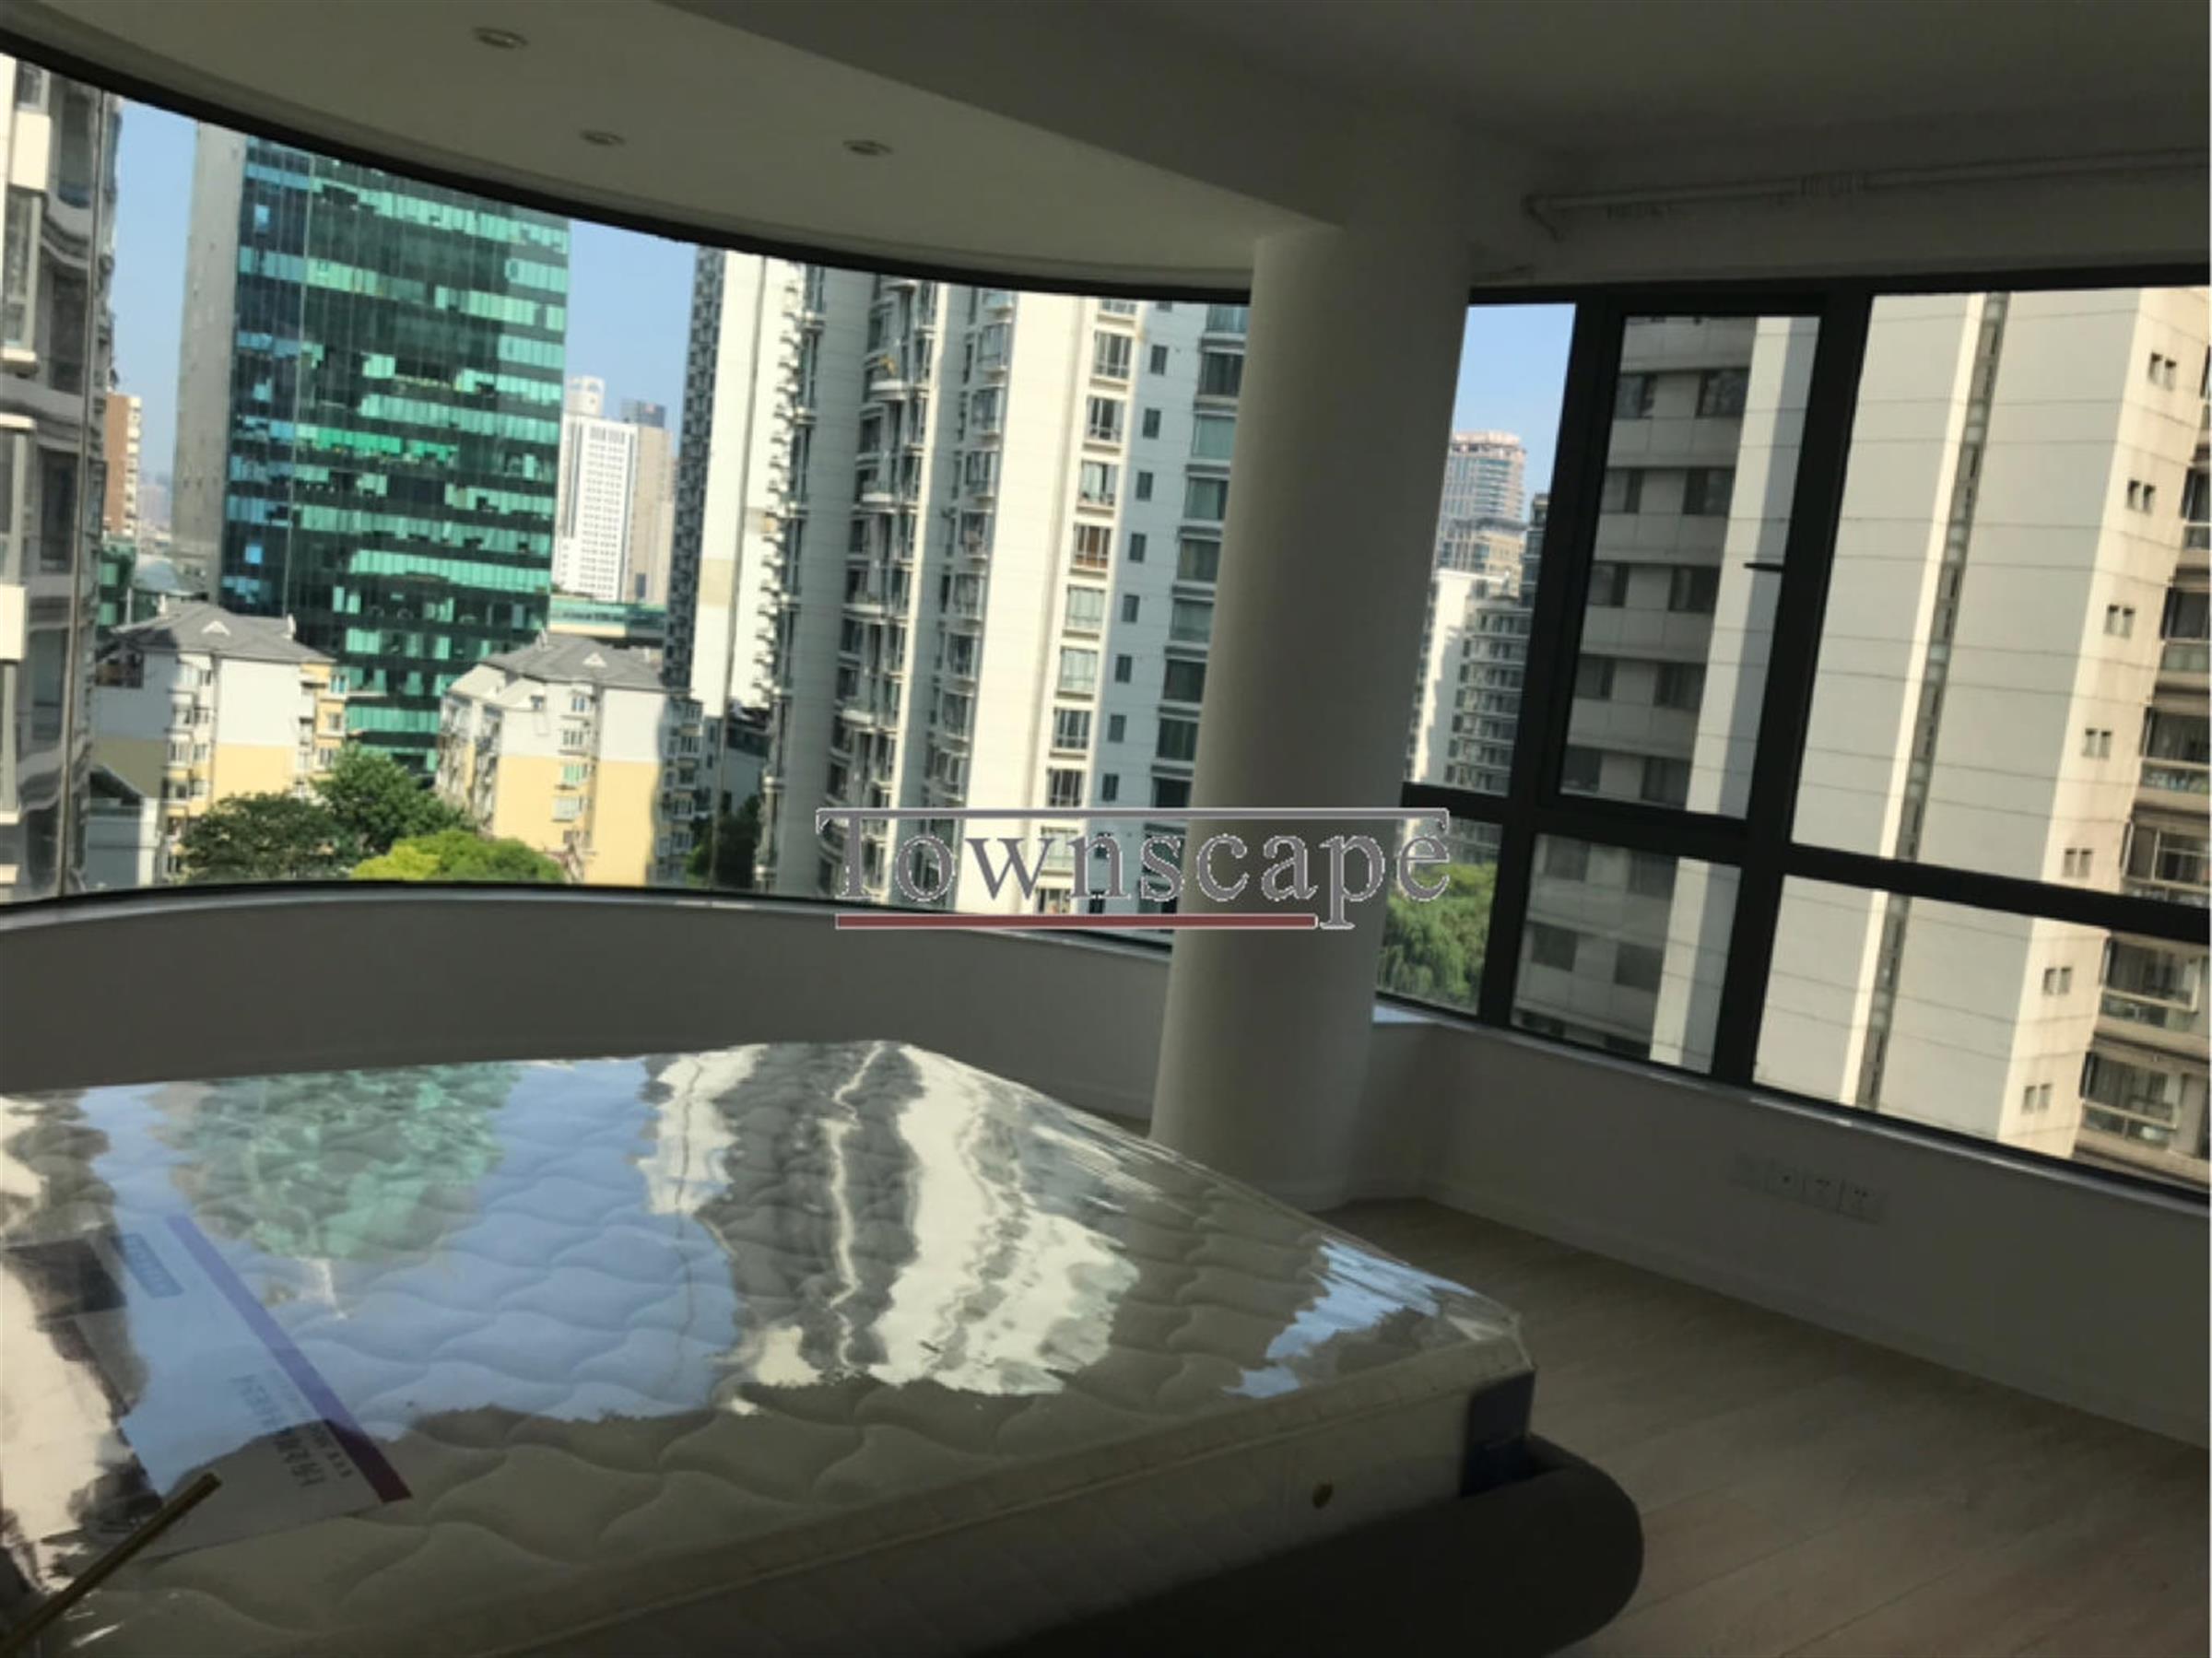 Wrap-around windows New Bright Spacious Apartment in High-End Top-of-City in Jing